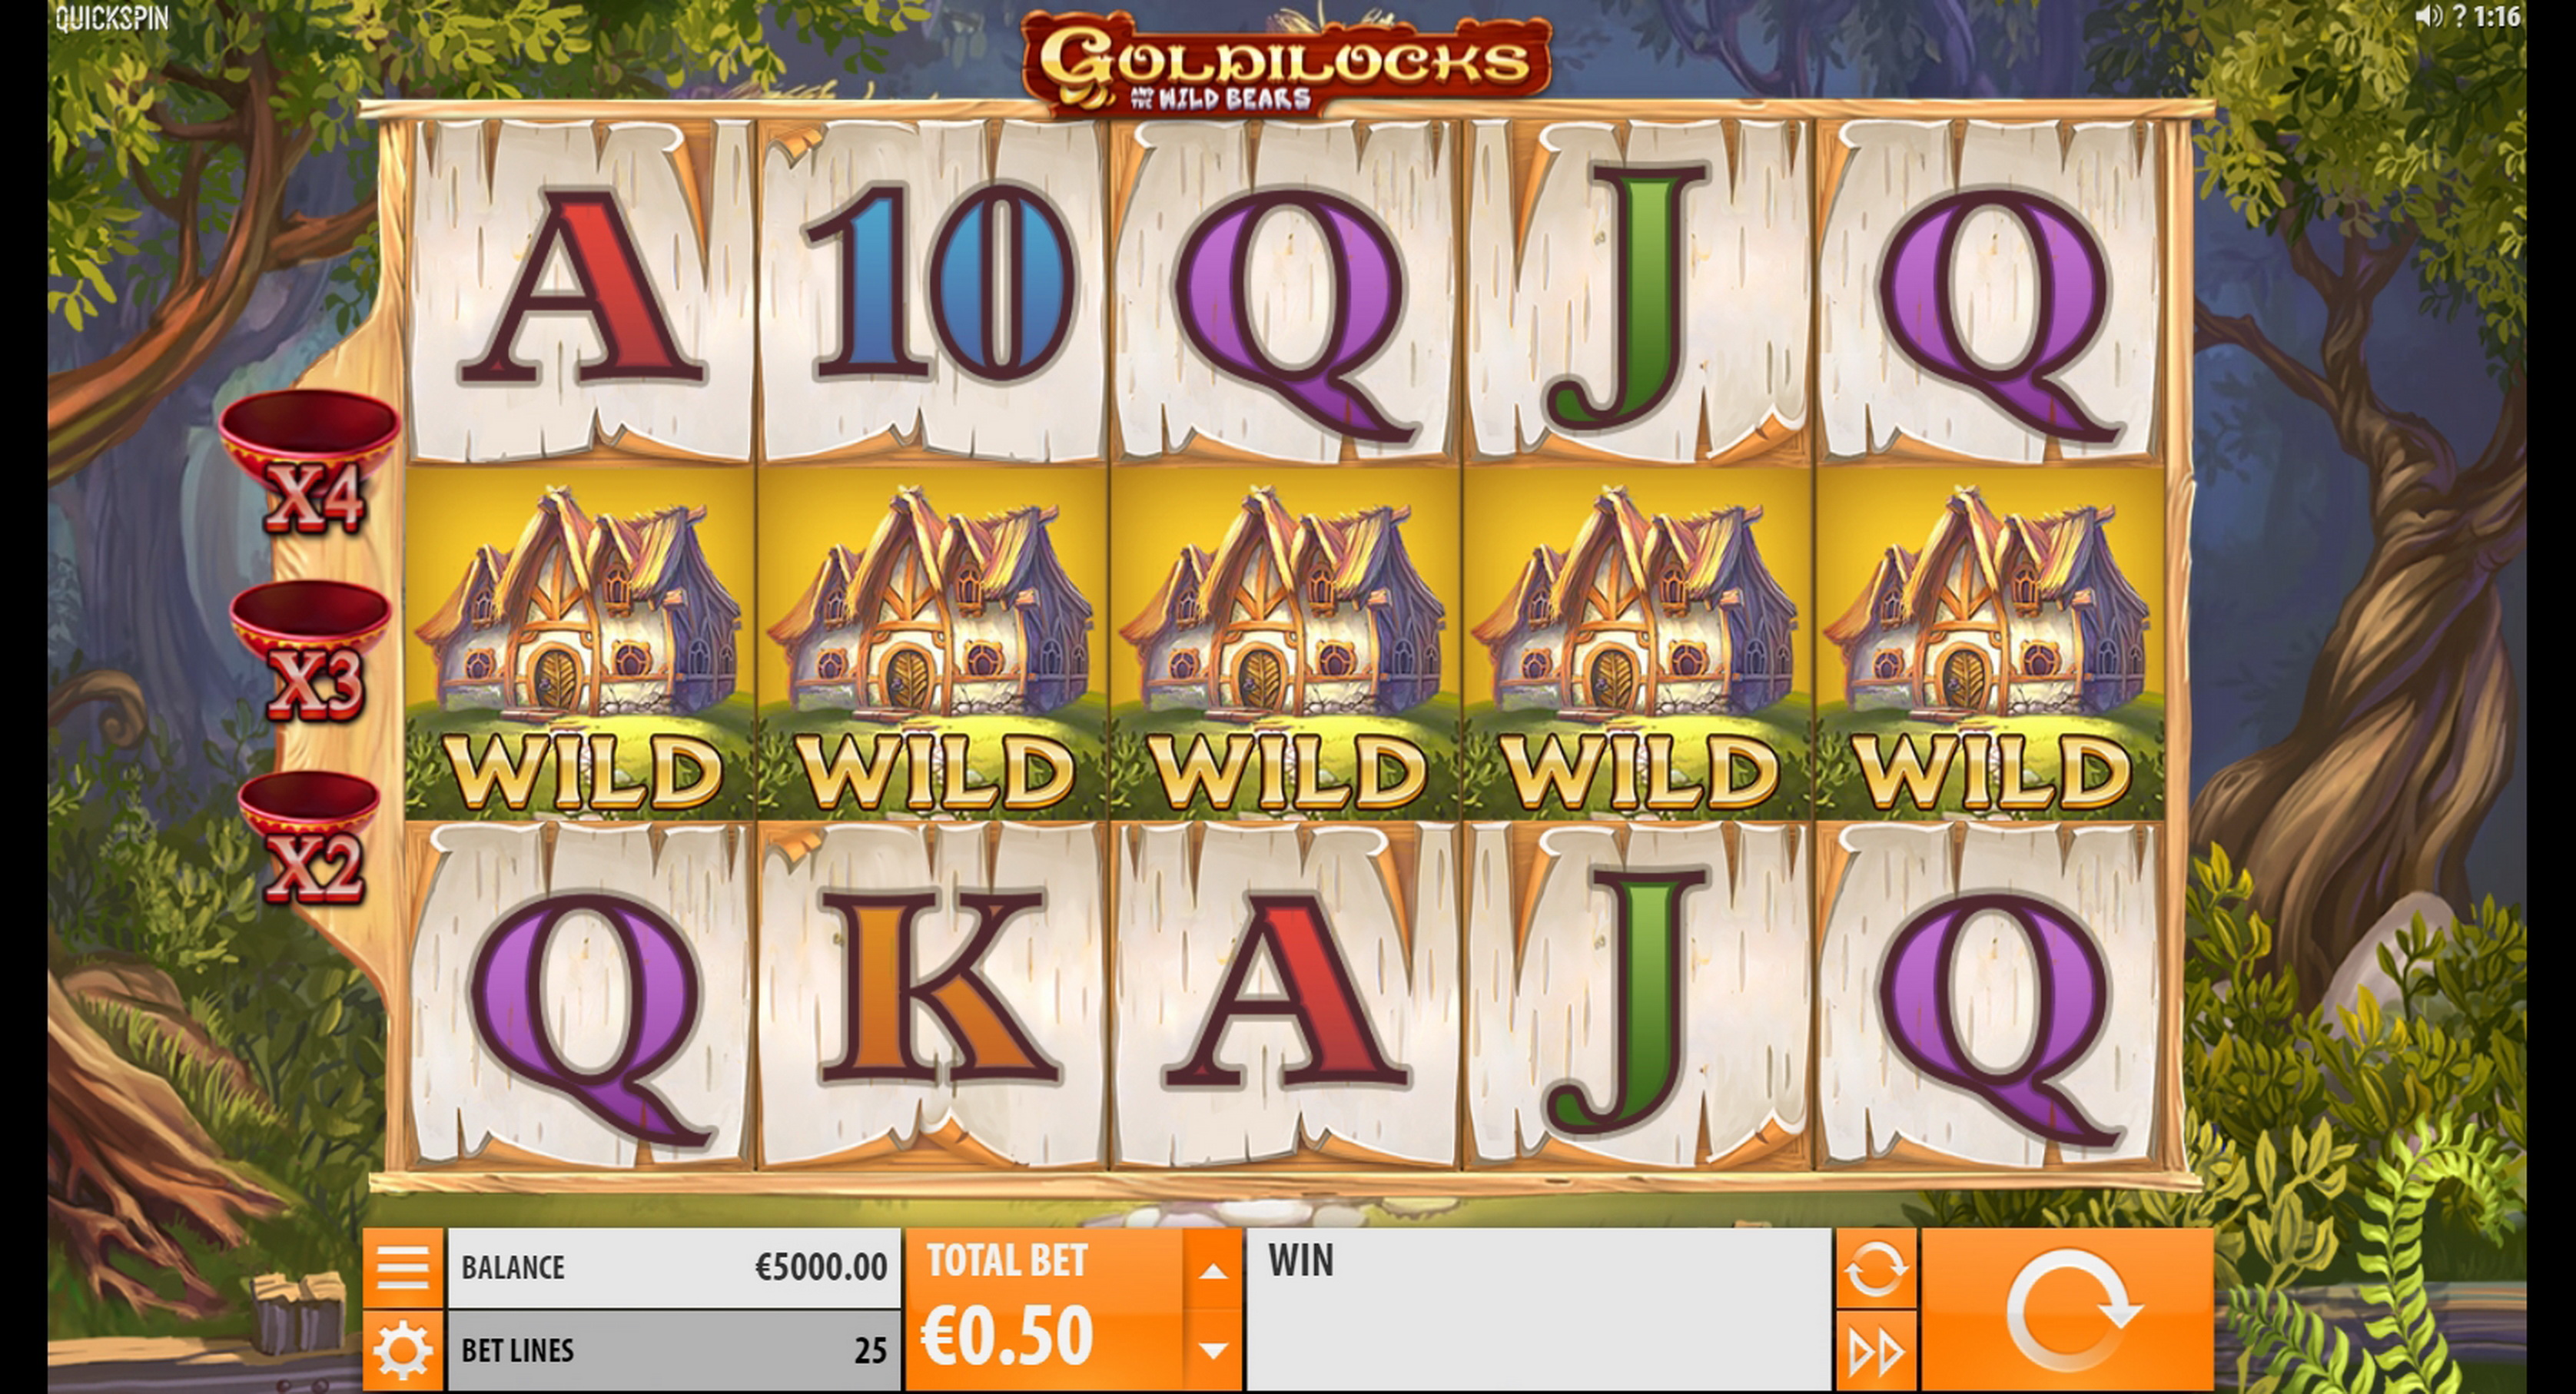 Reels in Goldilocks Slot Game by Quickspin